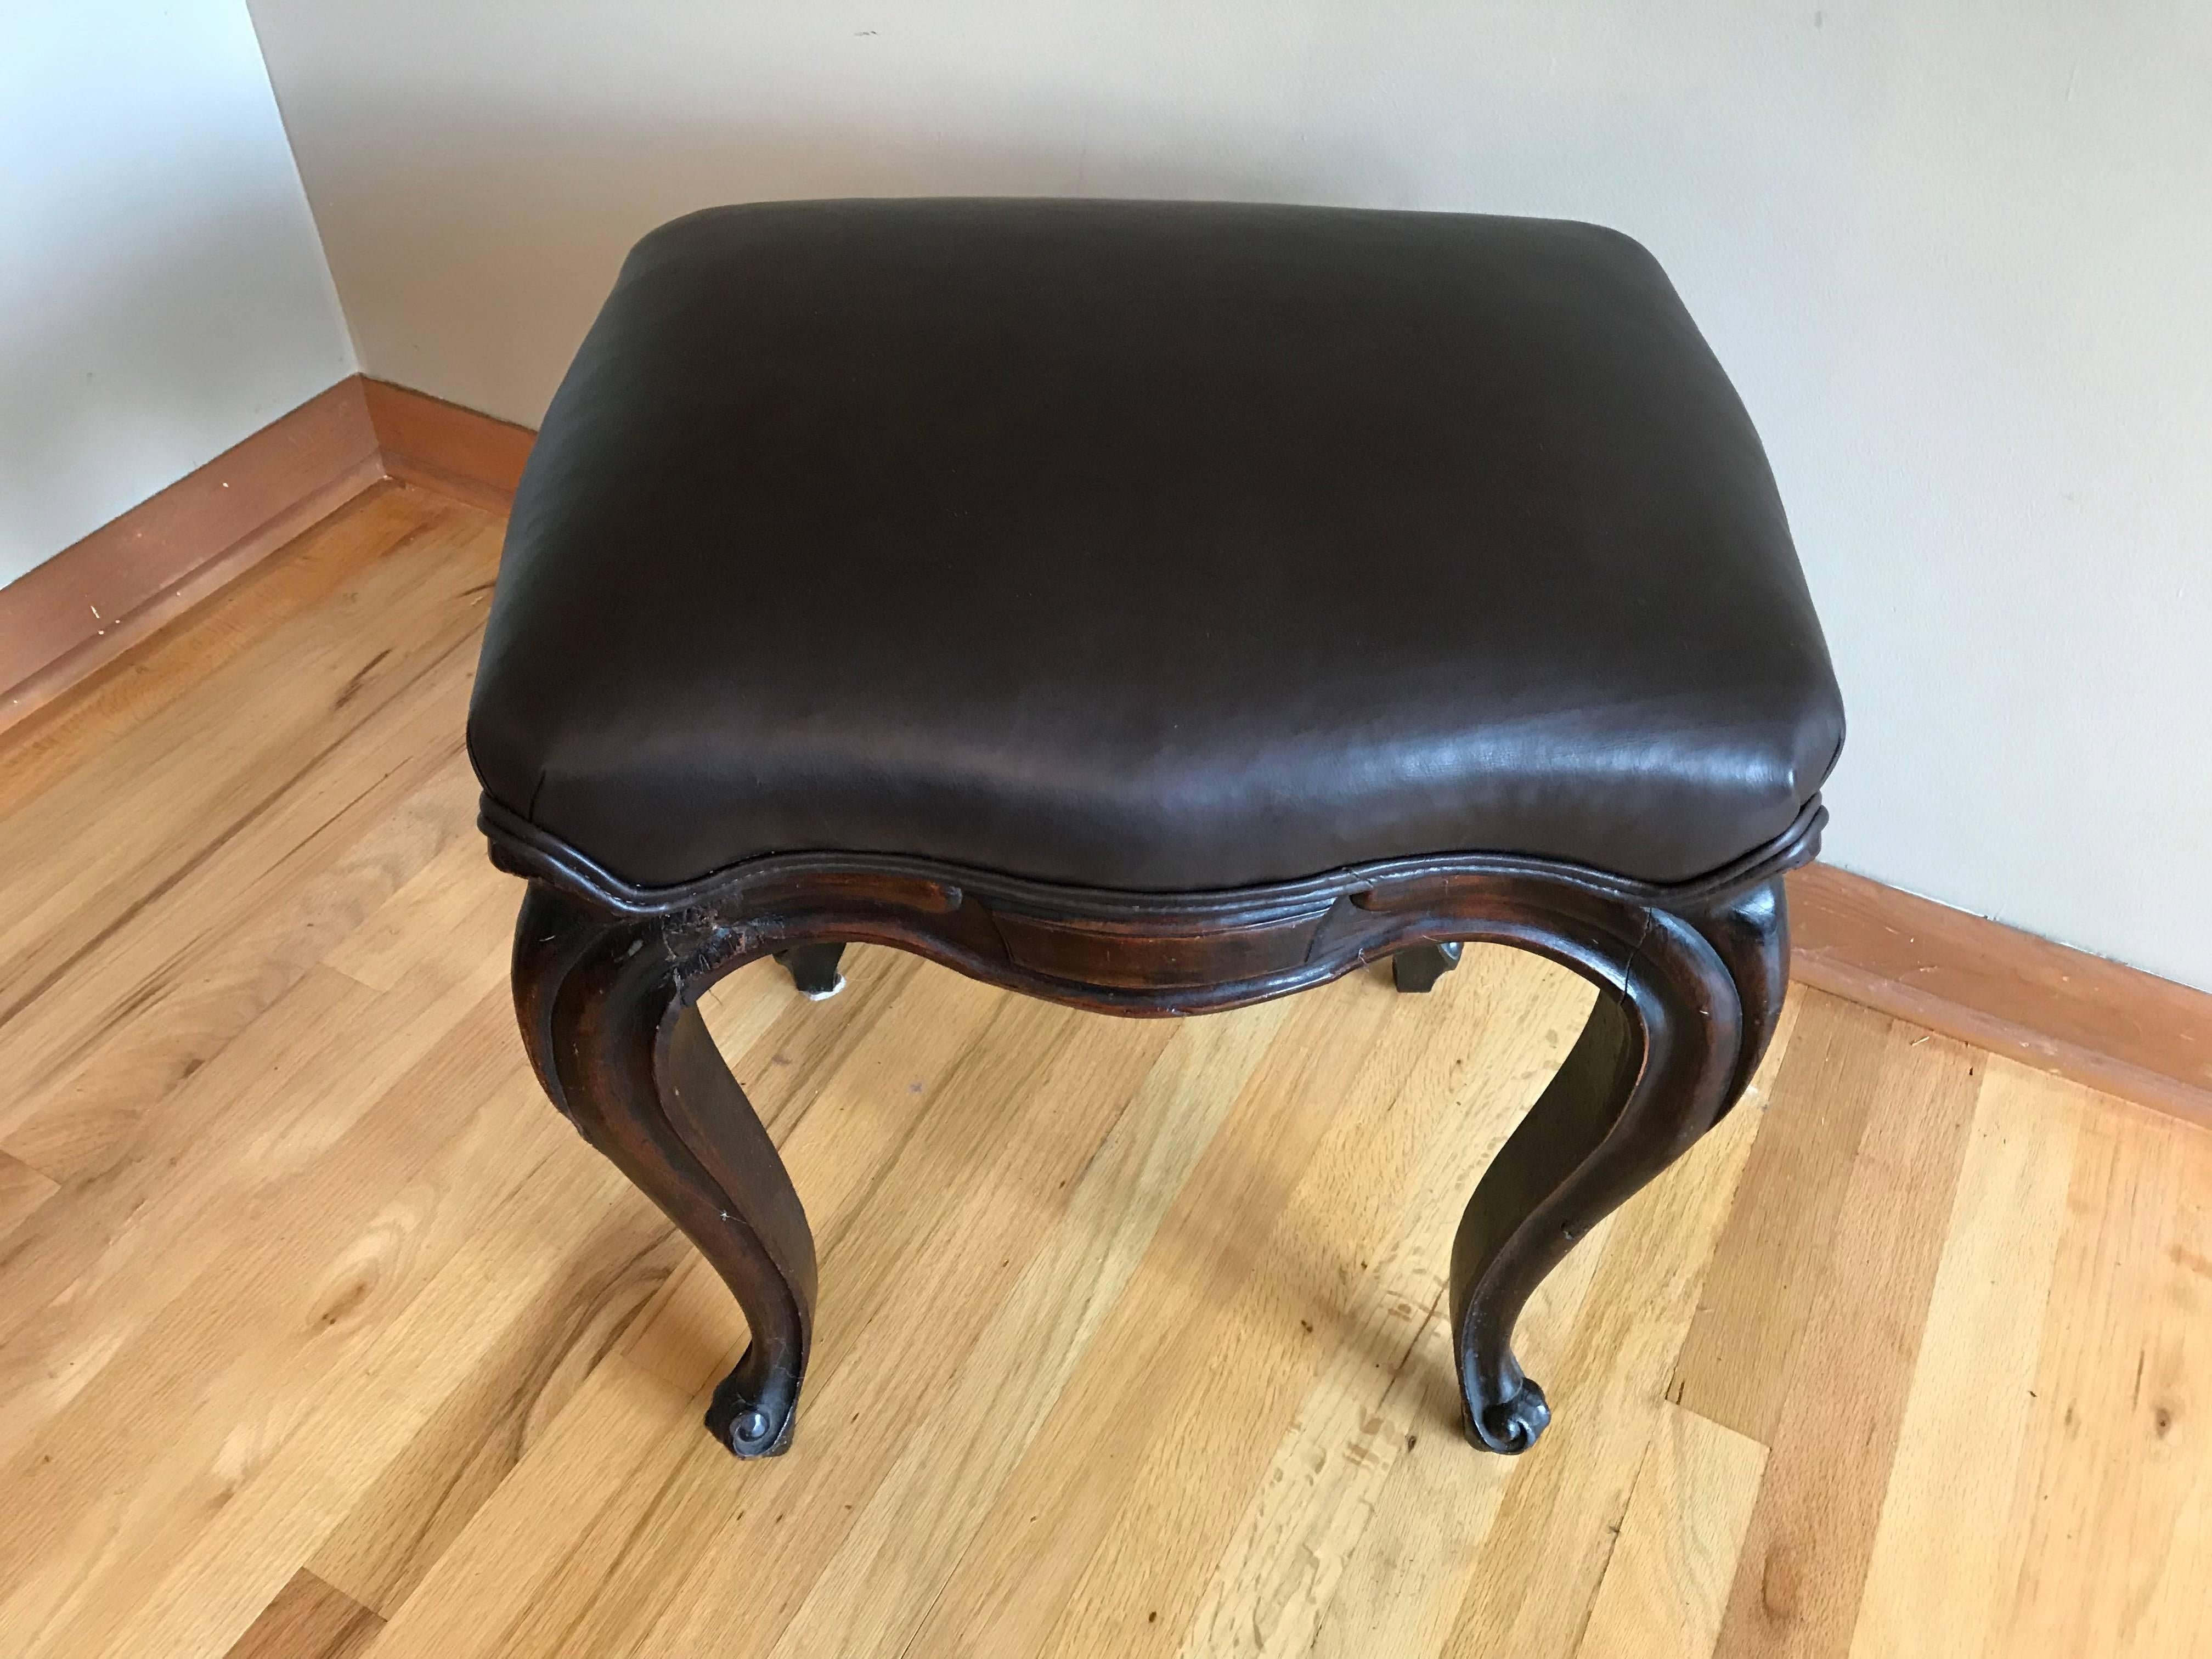 18th century Louis XV carved tabouret stool with new Edelman leather upholstery. Wonderful understated carving.